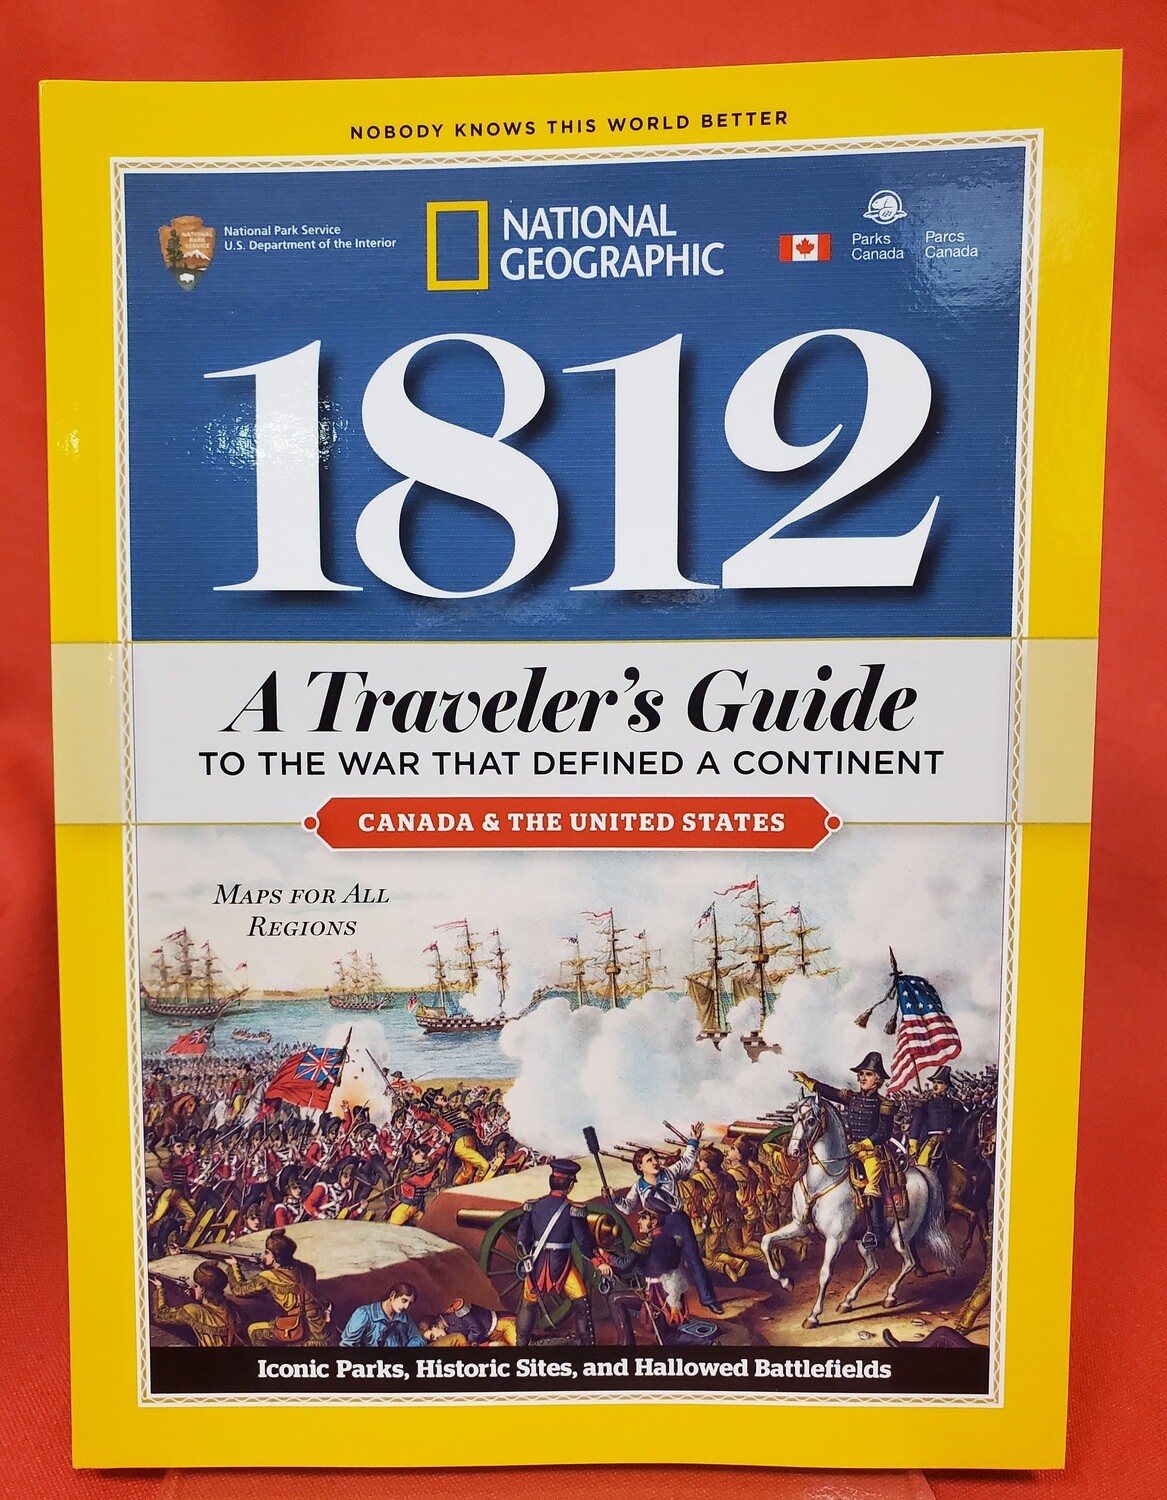 1812: A Traveler's Guide to the War that Defined a Continent